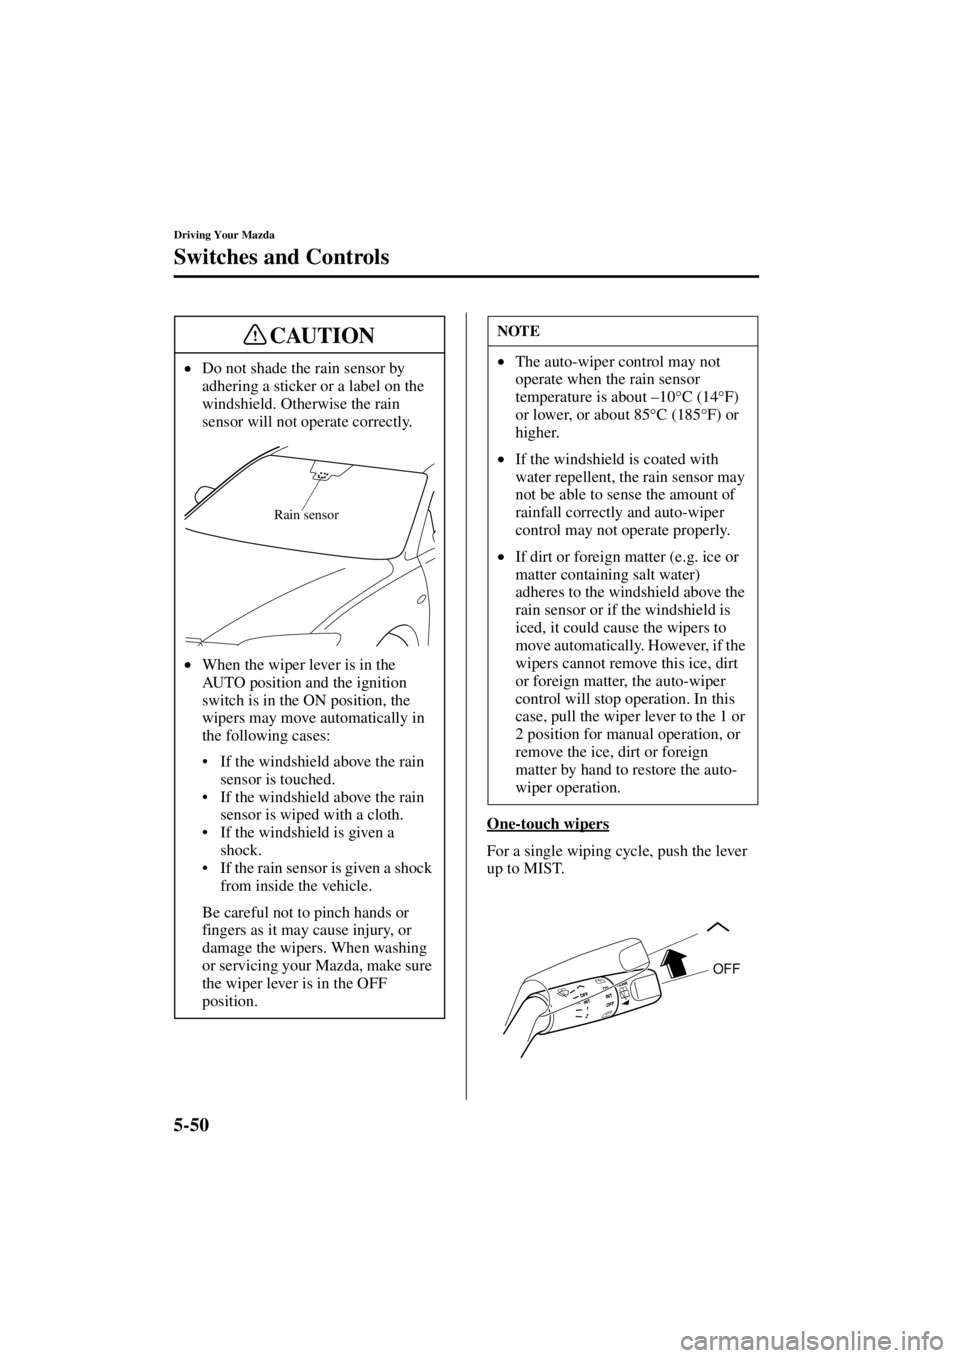 MAZDA MODEL 3 5-DOOR 2004  Owners Manual 5-50
Driving Your Mazda
Switches and Controls
Form No. 8S18-EA-03I
One-touch wipers
For a single wiping cycle, push the lever 
up to MIST.
•
Do not shade the rain sensor by 
adhering a sticker or a 